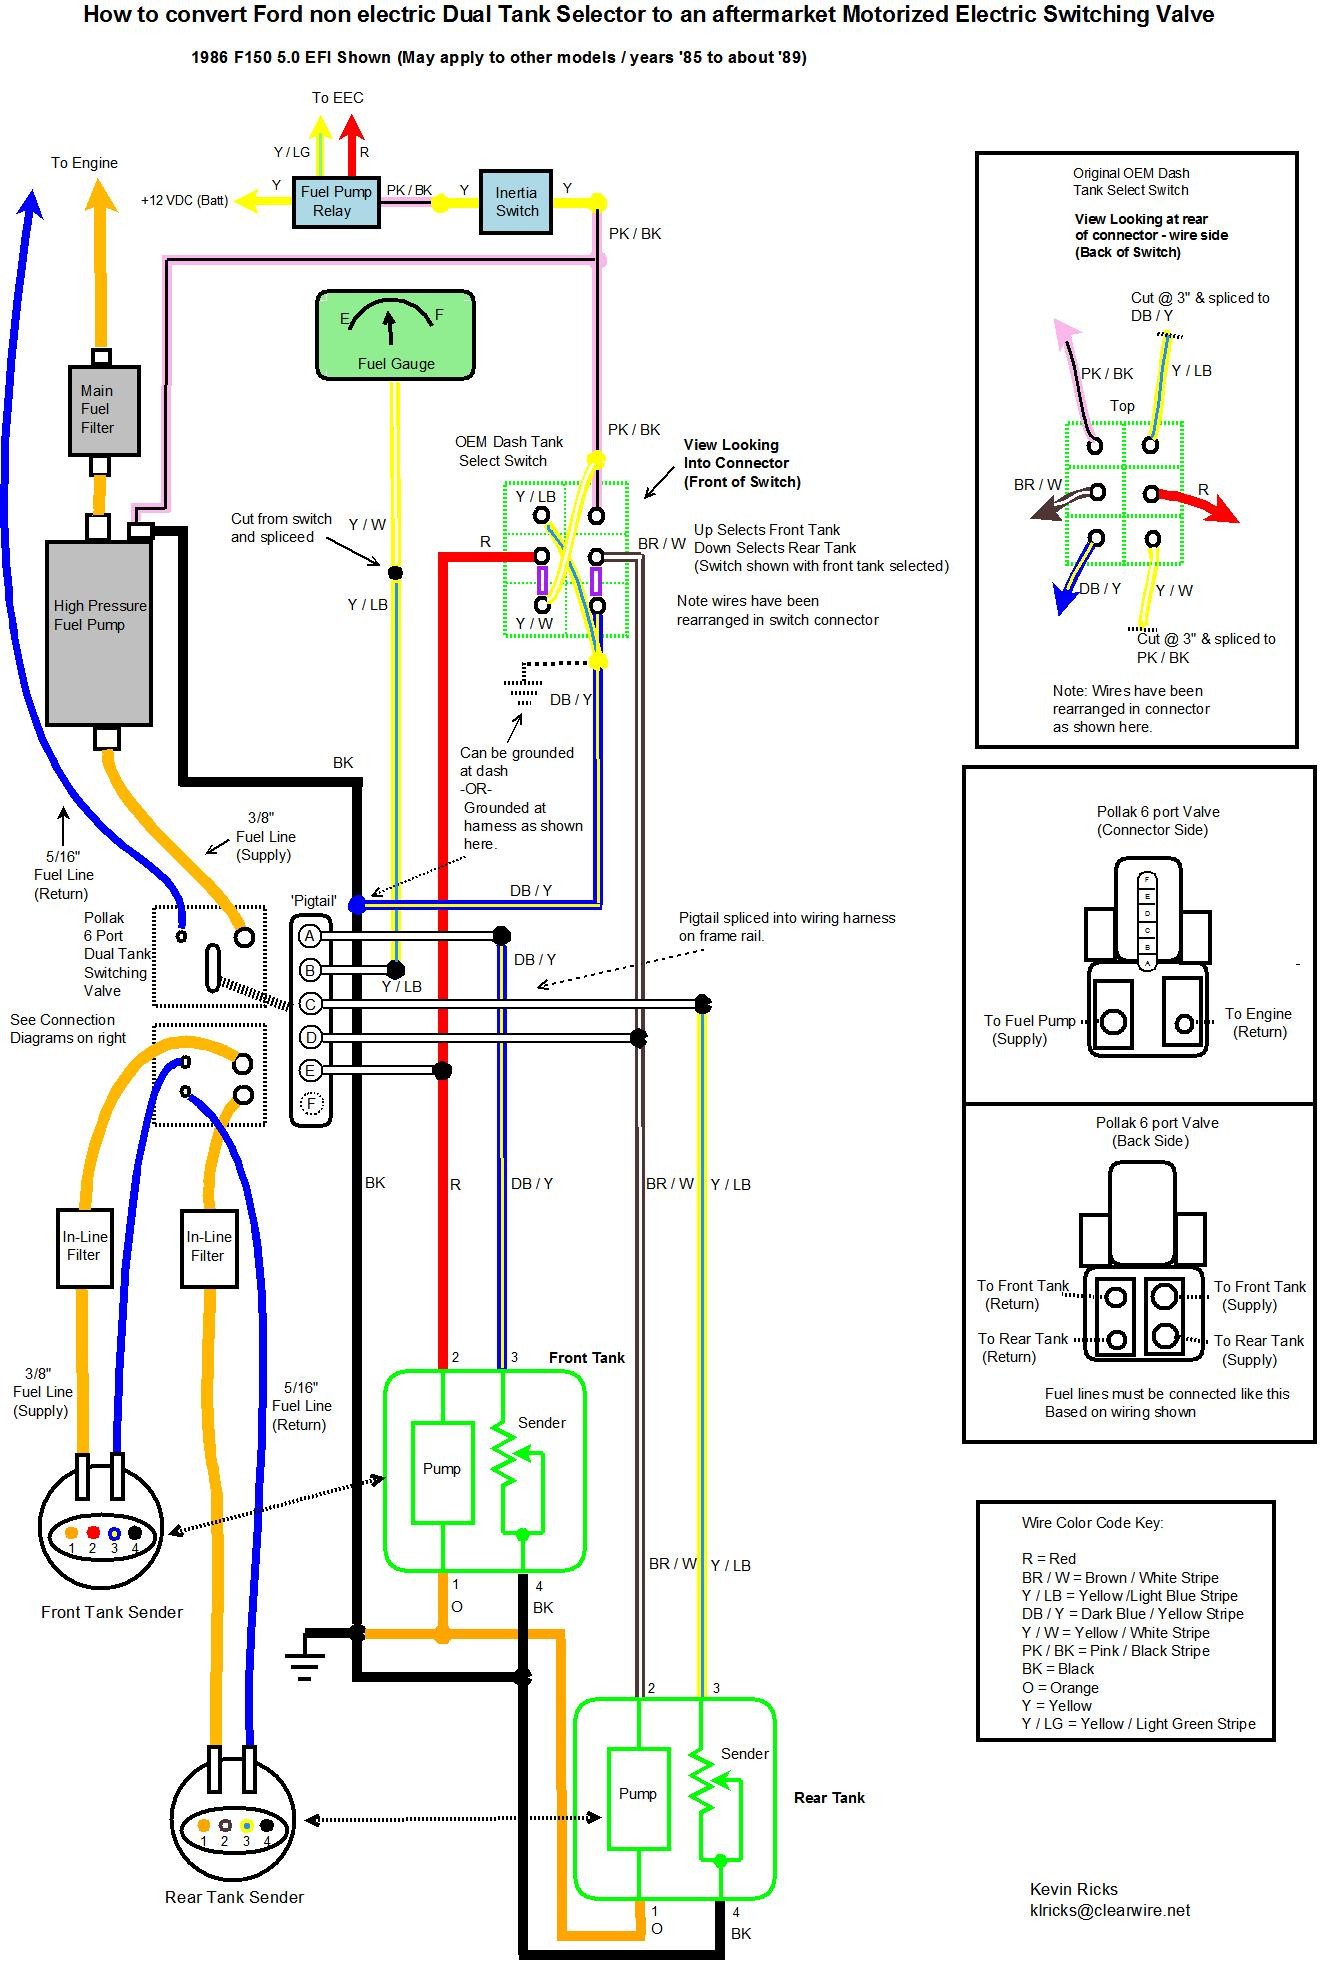 Labeled diagram fuel selector switch tank wiring. 